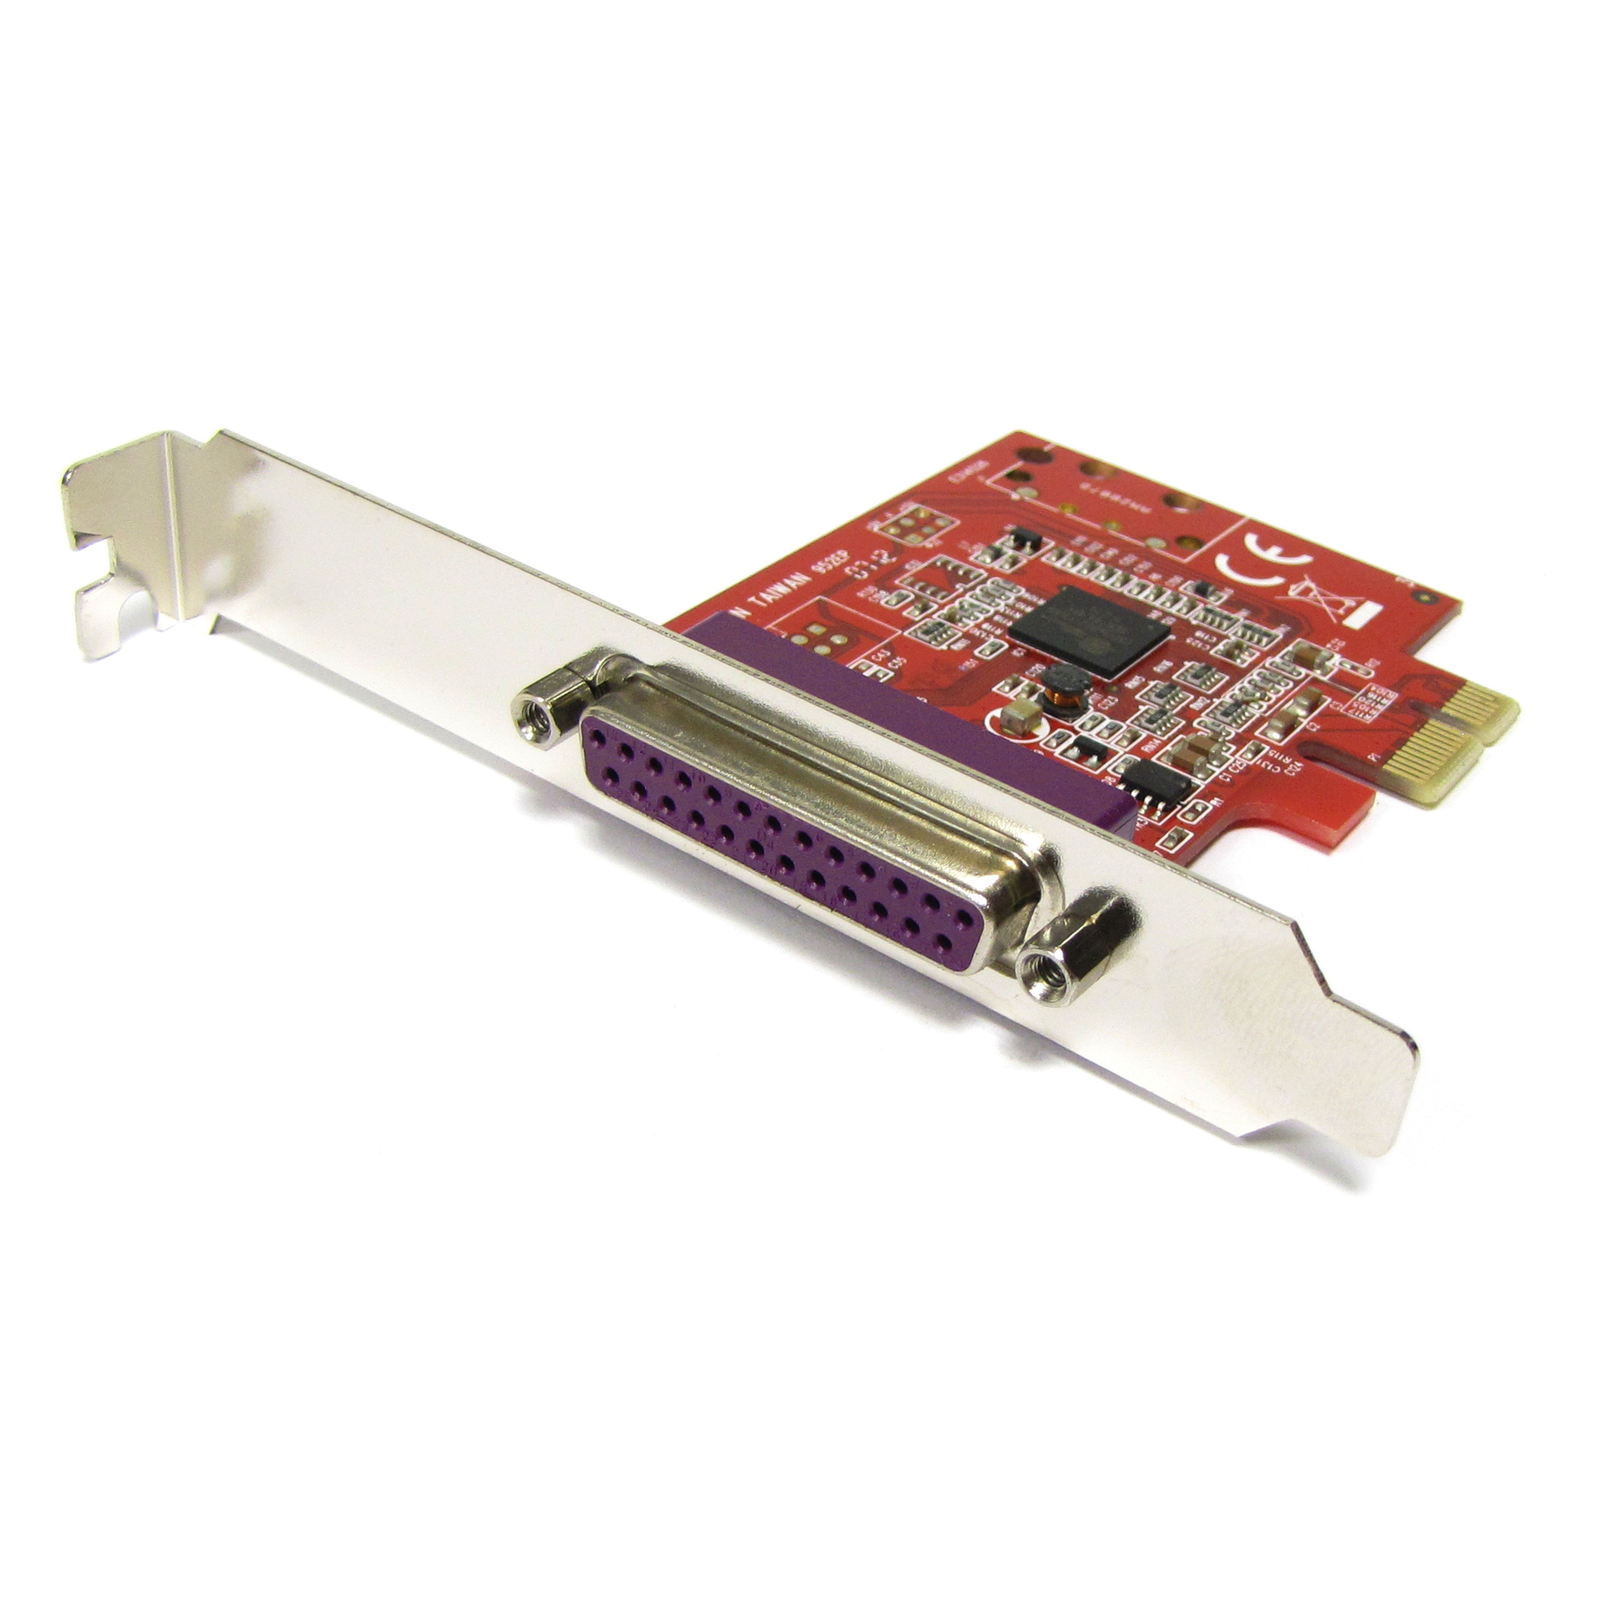 SEDNA PCI Express 1 Port Parallel ECP EPP Card with Low Profile Bracket included 